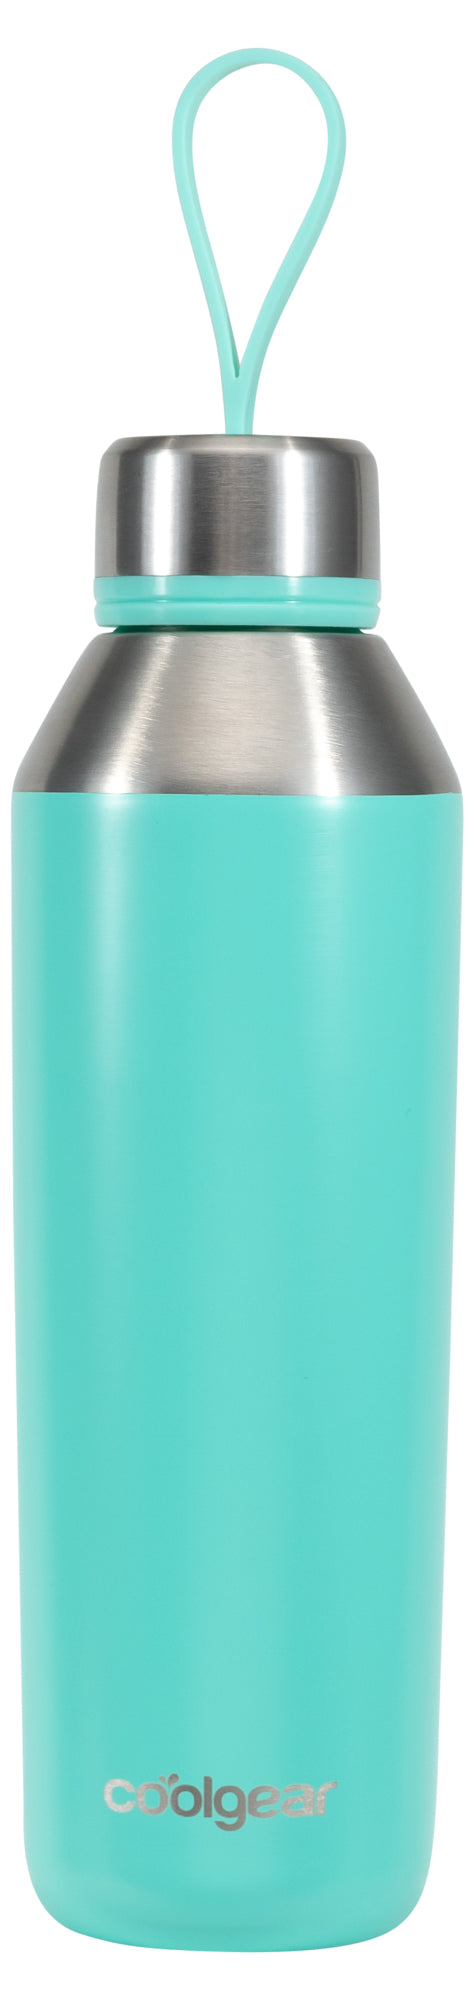 2 Pack COOL GEAR Saturn 24oz Stainless Steel Water Bottle